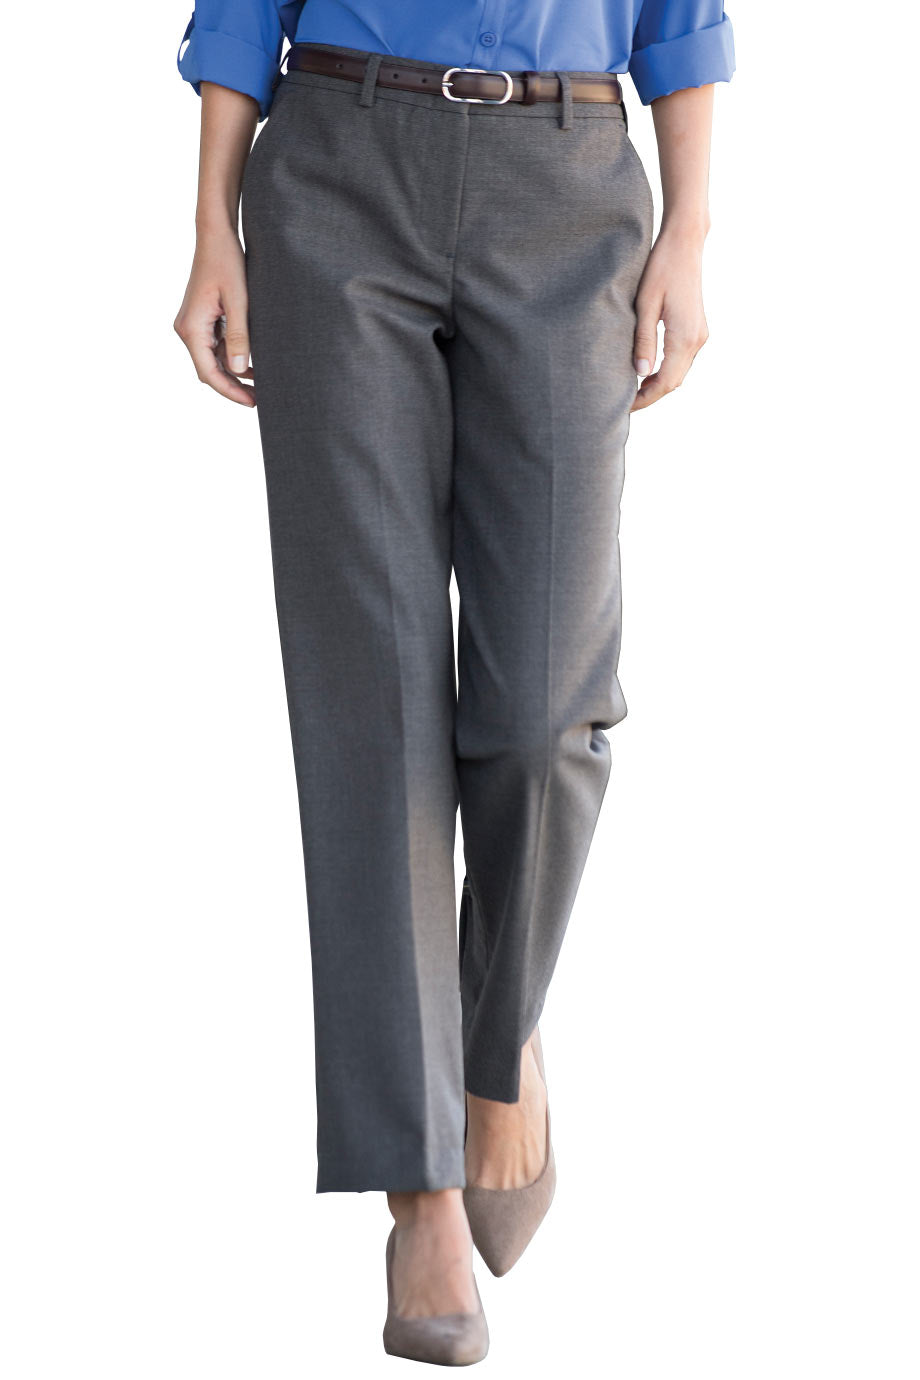 Women's Washable Wool Flat Front Pant- Replacing Intaglio Pant